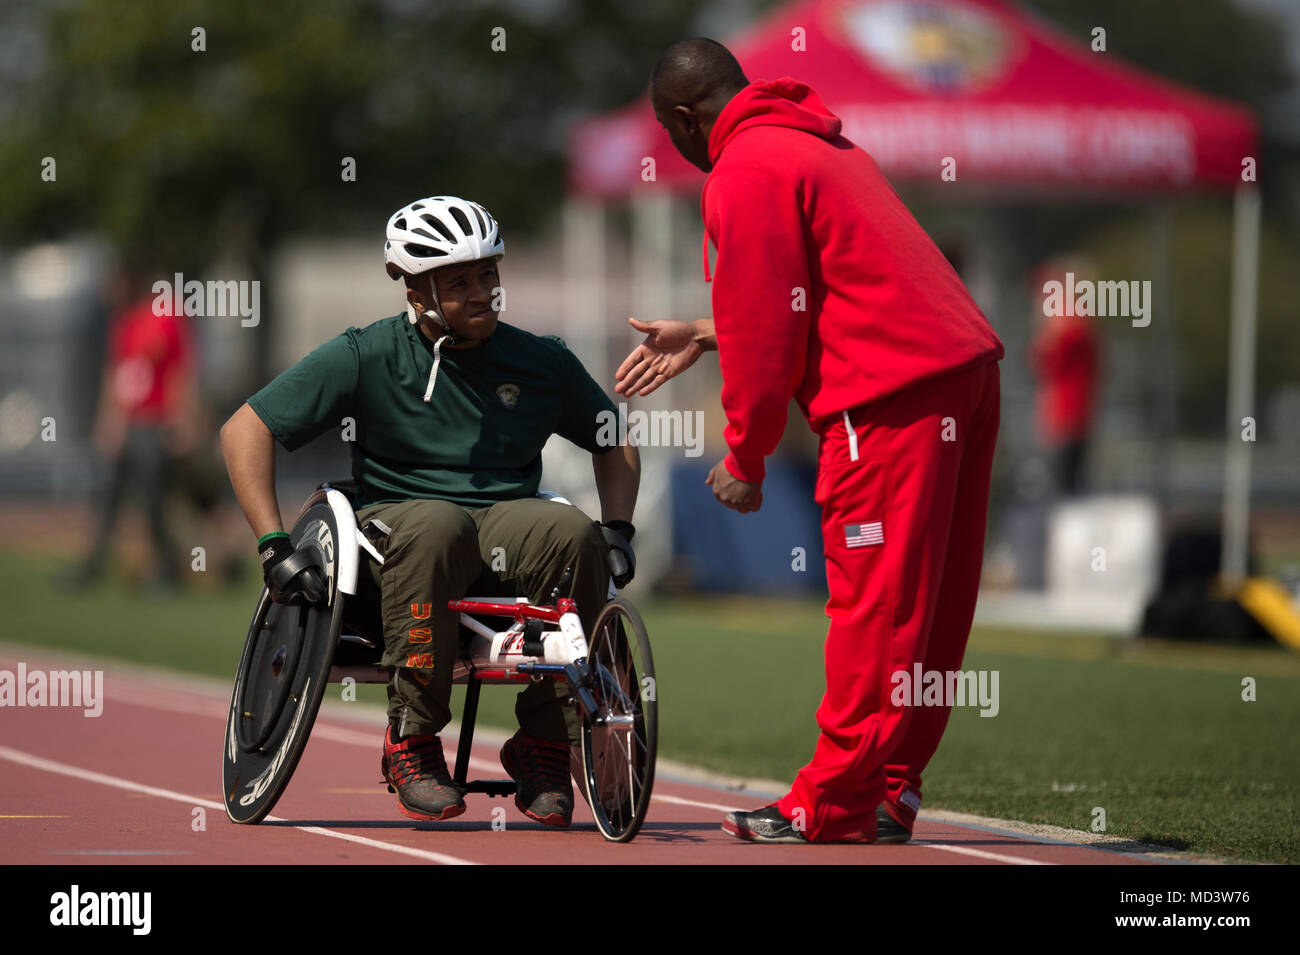 U.S. Marine Corps Cpl. Oscar Jordan takes instruction from U.S. Marine Corps Staff Sgt. Michael Pride, during a 2018 Marine Corps Trials track and field practice at Marine Corps Base Camp Lejeune, N.C., March 16, 2018. Jordan is a member of the 2018 Marine Corps Trials Wounded Warrior Battalion-East Team. Pride is a track and field coach for the 2018 Marine Corps Trials. The Marine Corps Trials promotes recovery and rehabilitation through adaptive sport participation and develops camaraderie among recovering service members (RSMs) and veterans. It is as an opportunity for RSMs to demonstrate t Stock Photo